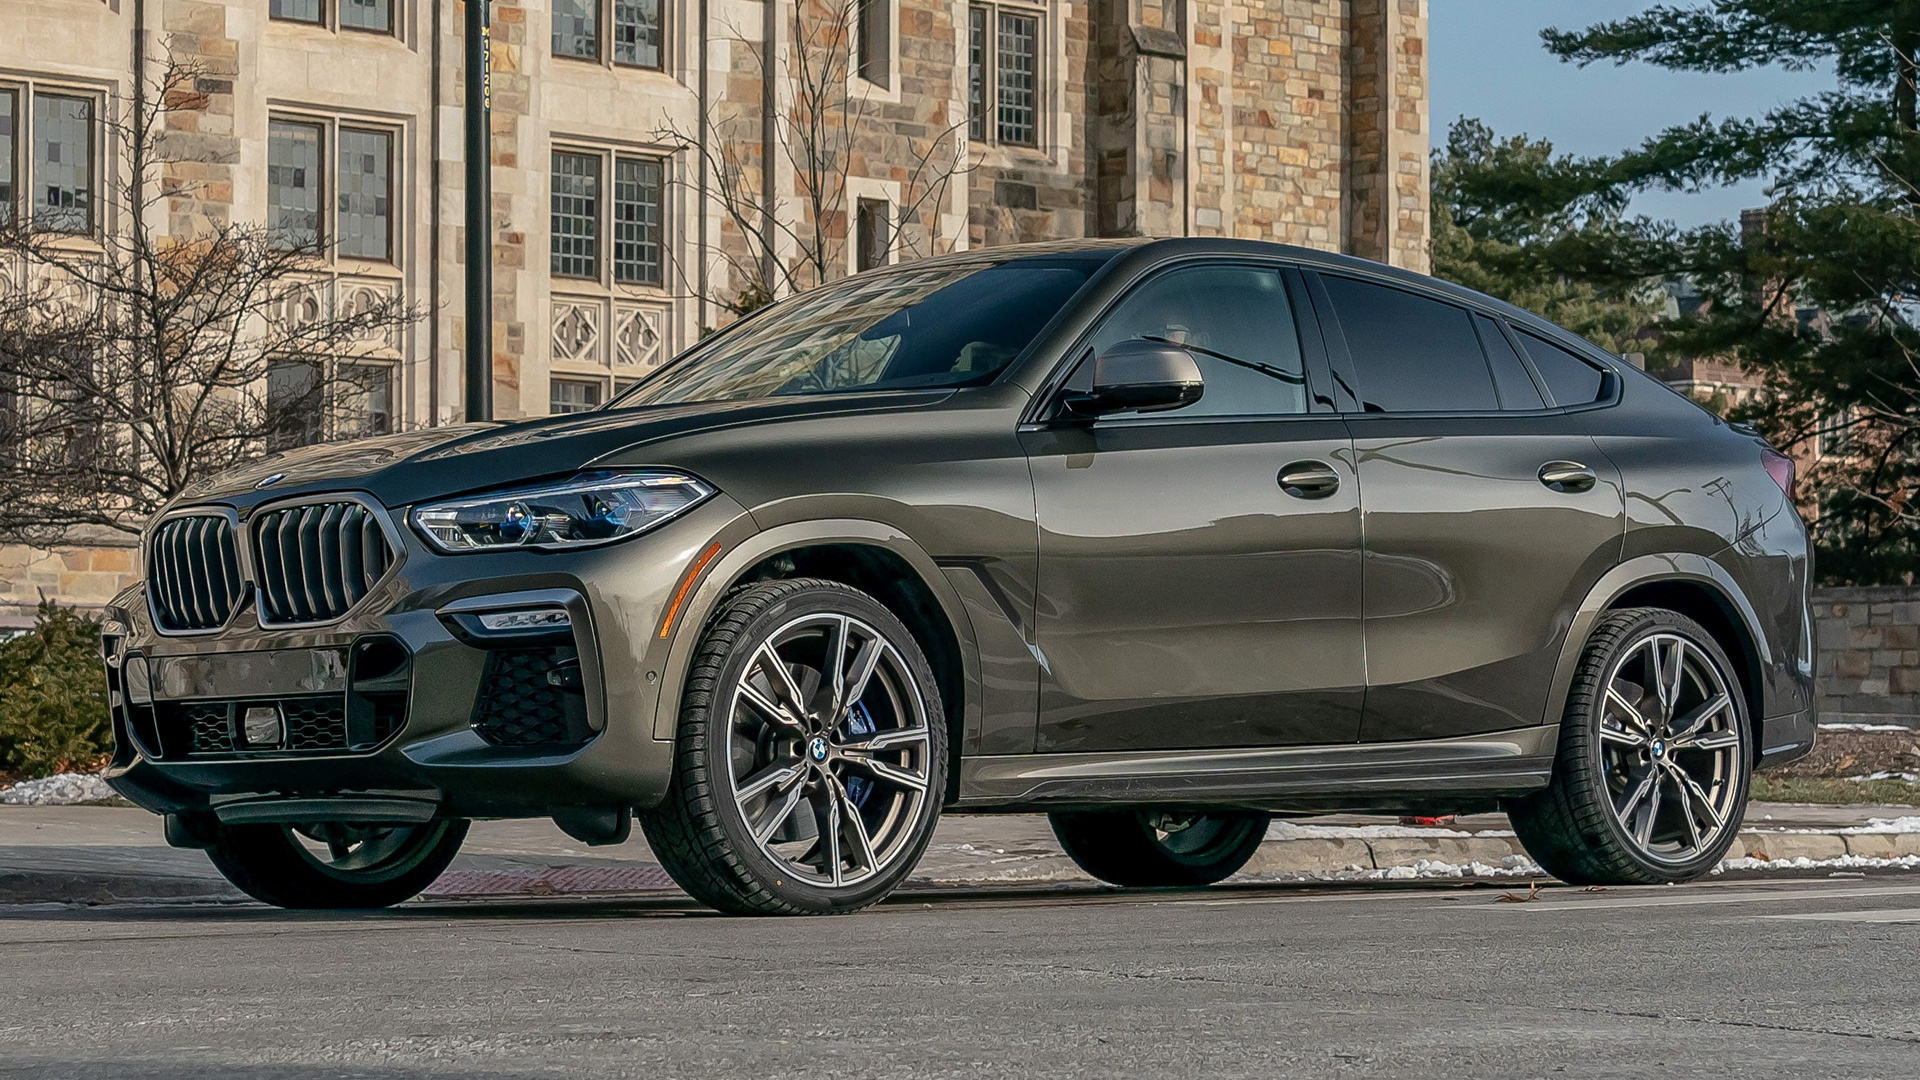 2020 BMW X6 M50i (US) - Wallpapers and HD Images | Car Pixel